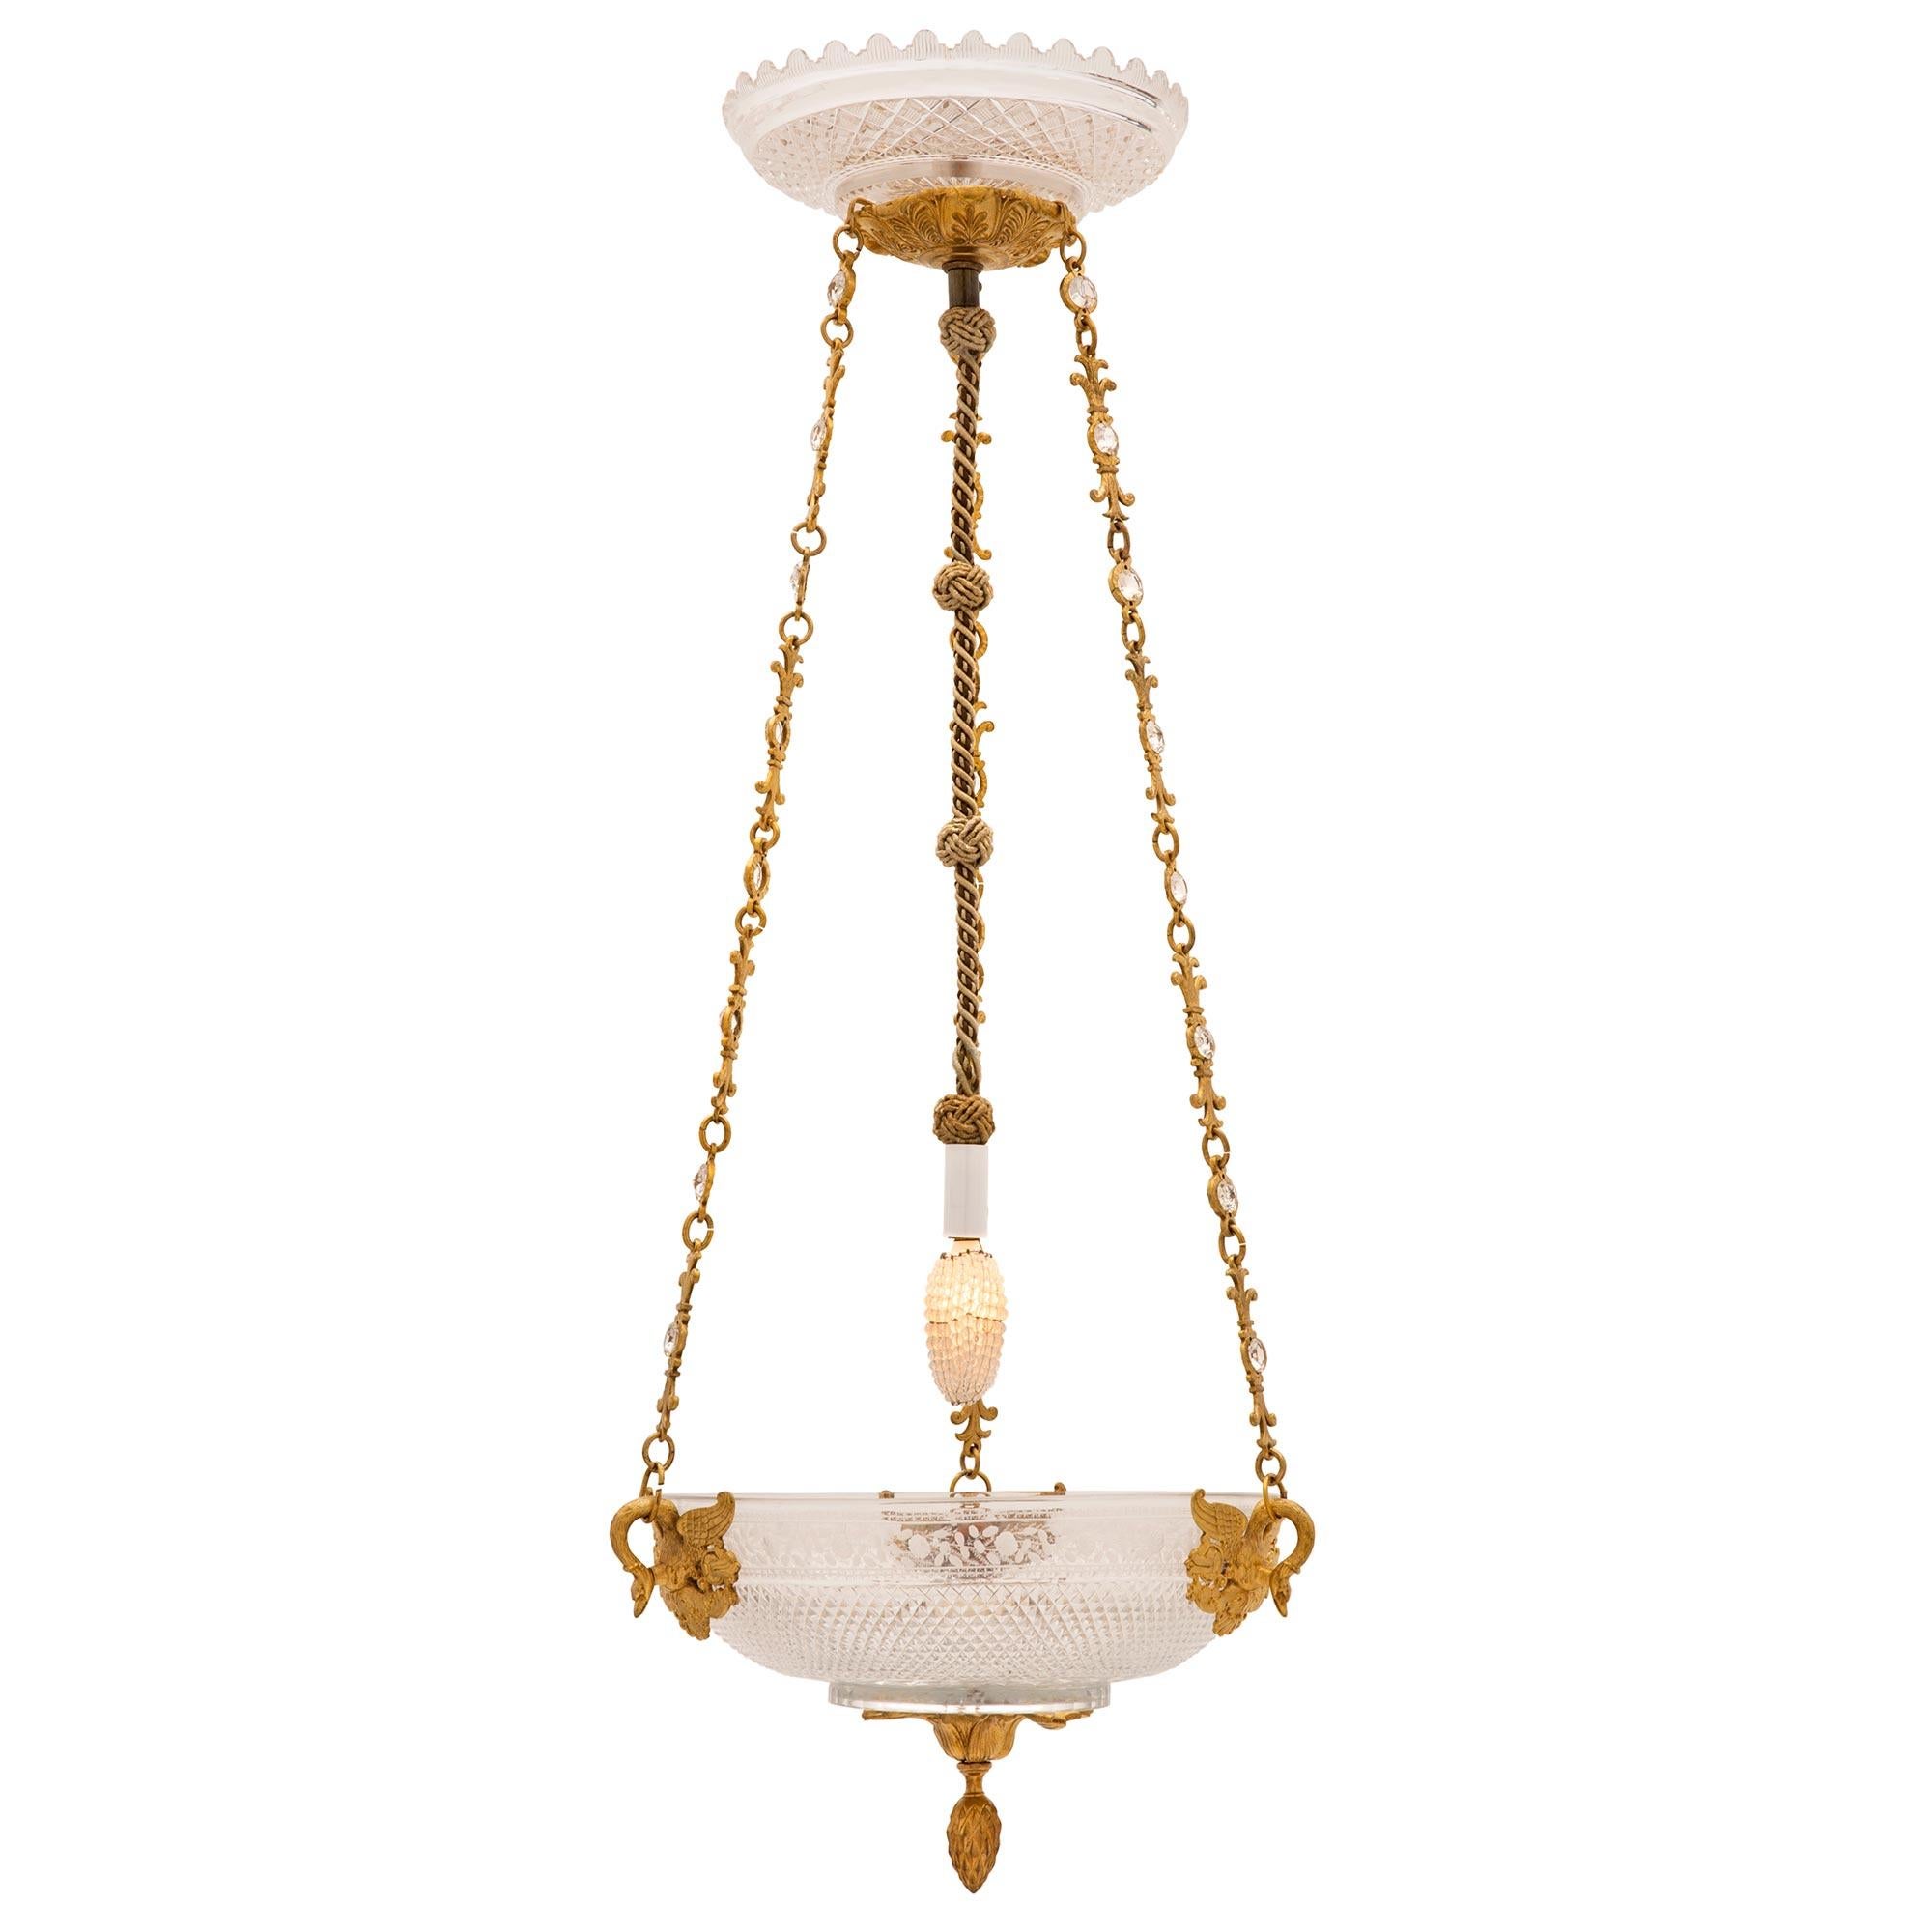 A most elegant and unique French early 19th century 1st Empire period Baccarat crystal and ormolu chandelier. The chandelier is centered by a charming and richly chased bottom ormolu acorn finial surrounded by lovely foliate designs. The most